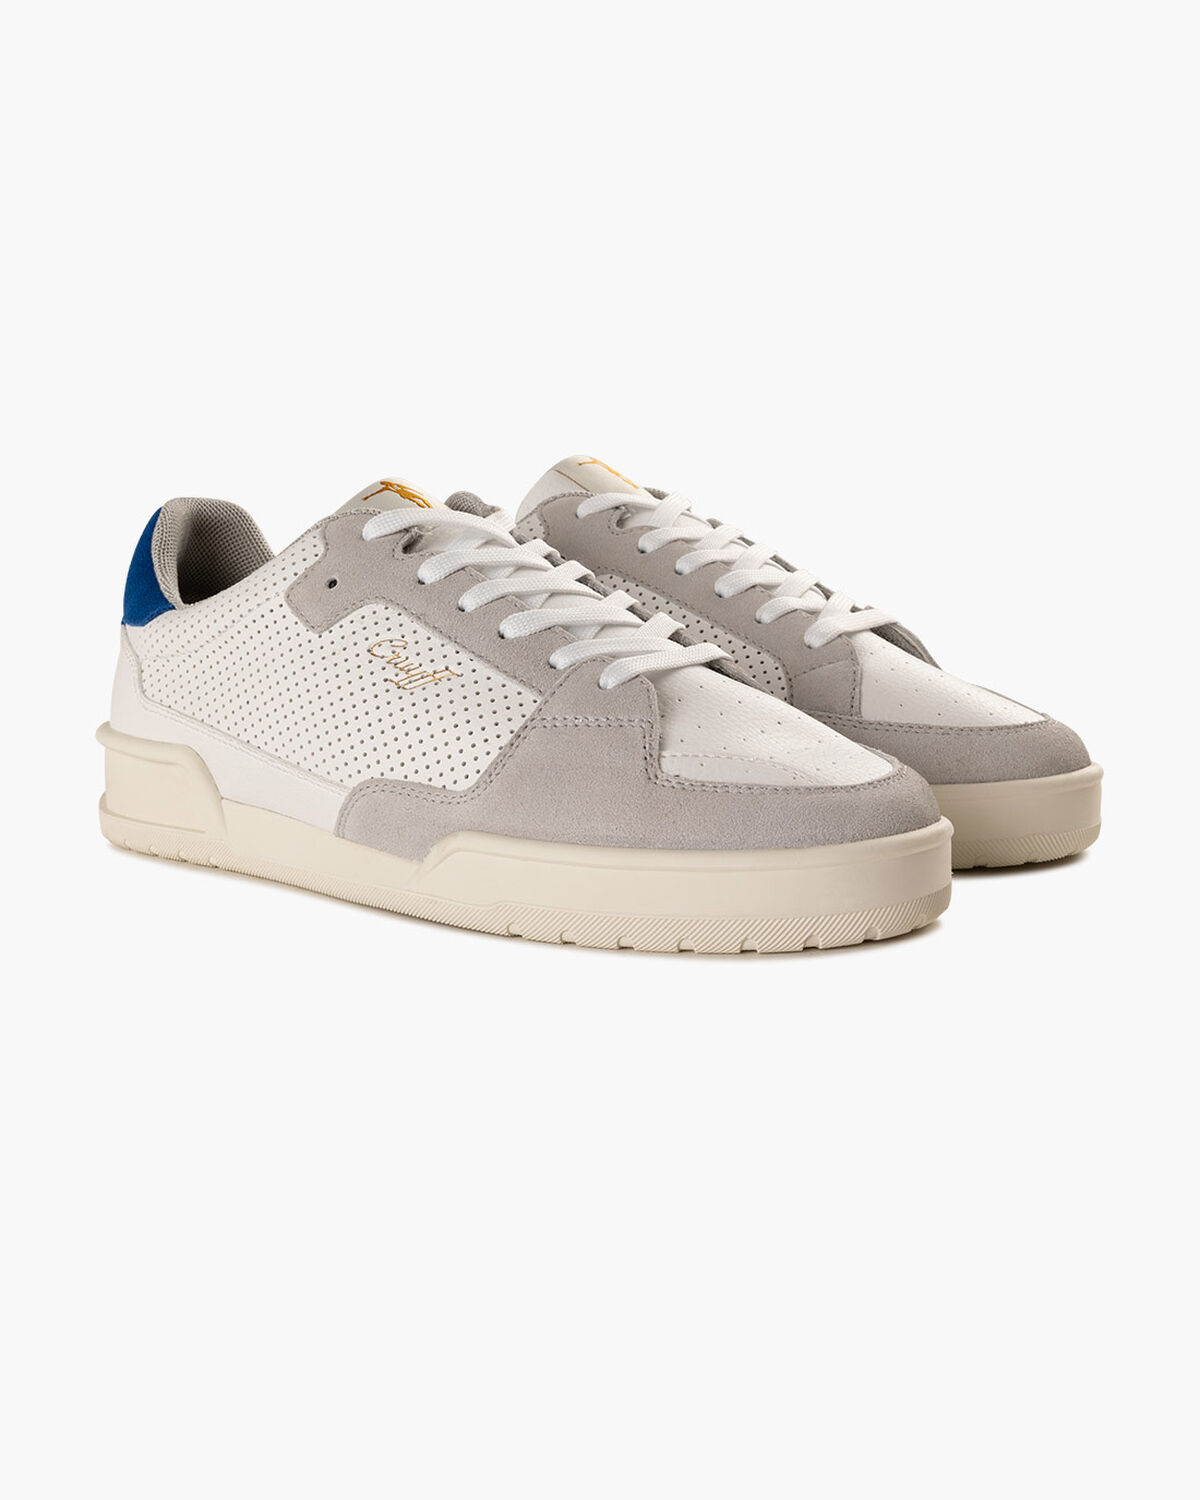 Legacy Twincup - Tumbled/Suede, White/Blue, hi-res